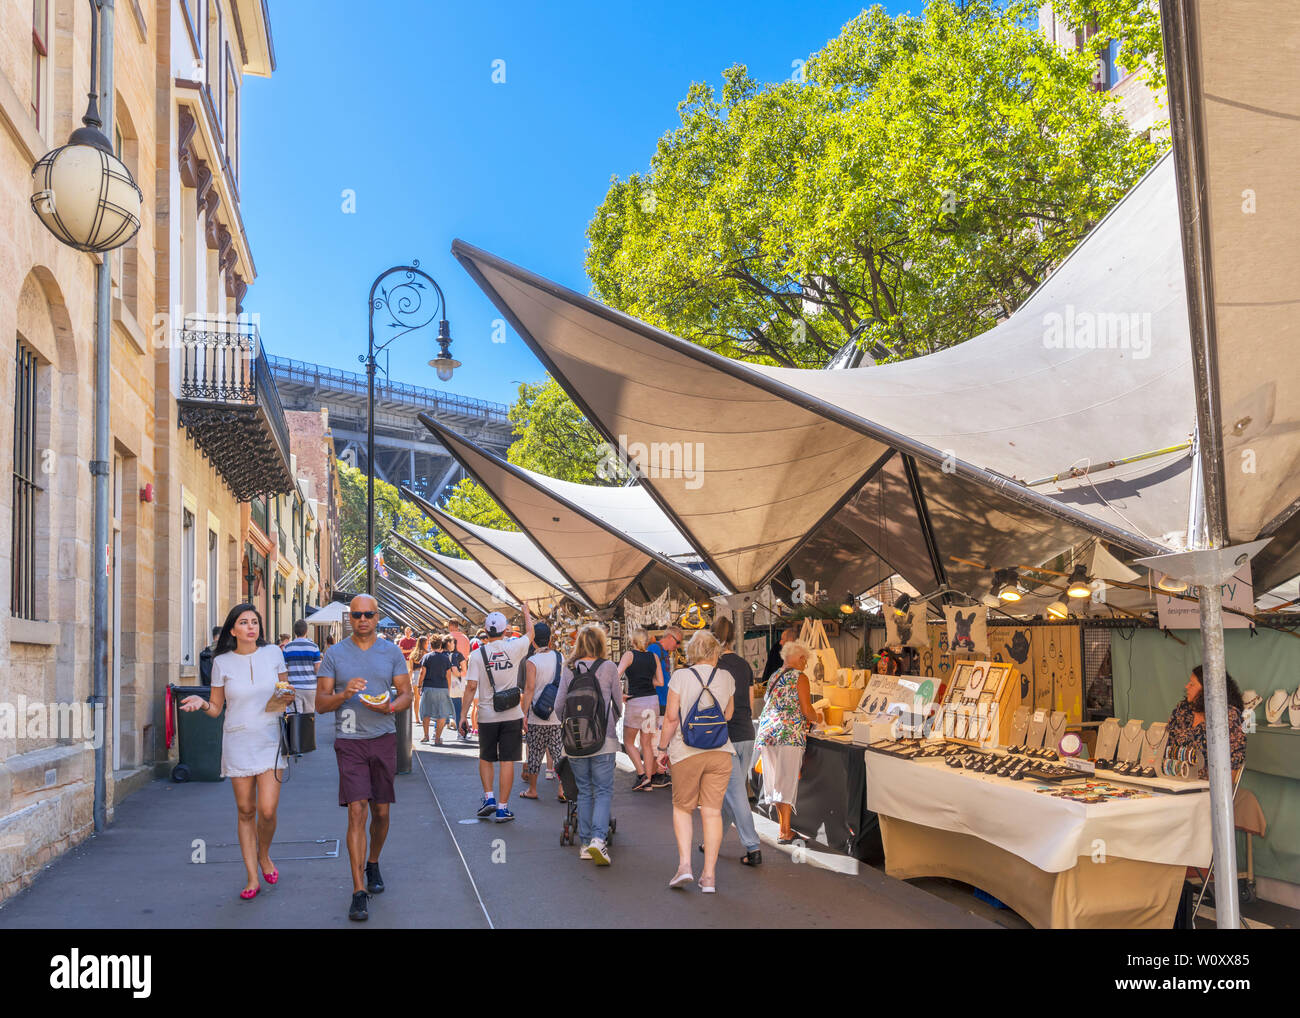 Sunday Market on George Street in The Rocks district, Sydney, New South Wales, Australia Stock Photo